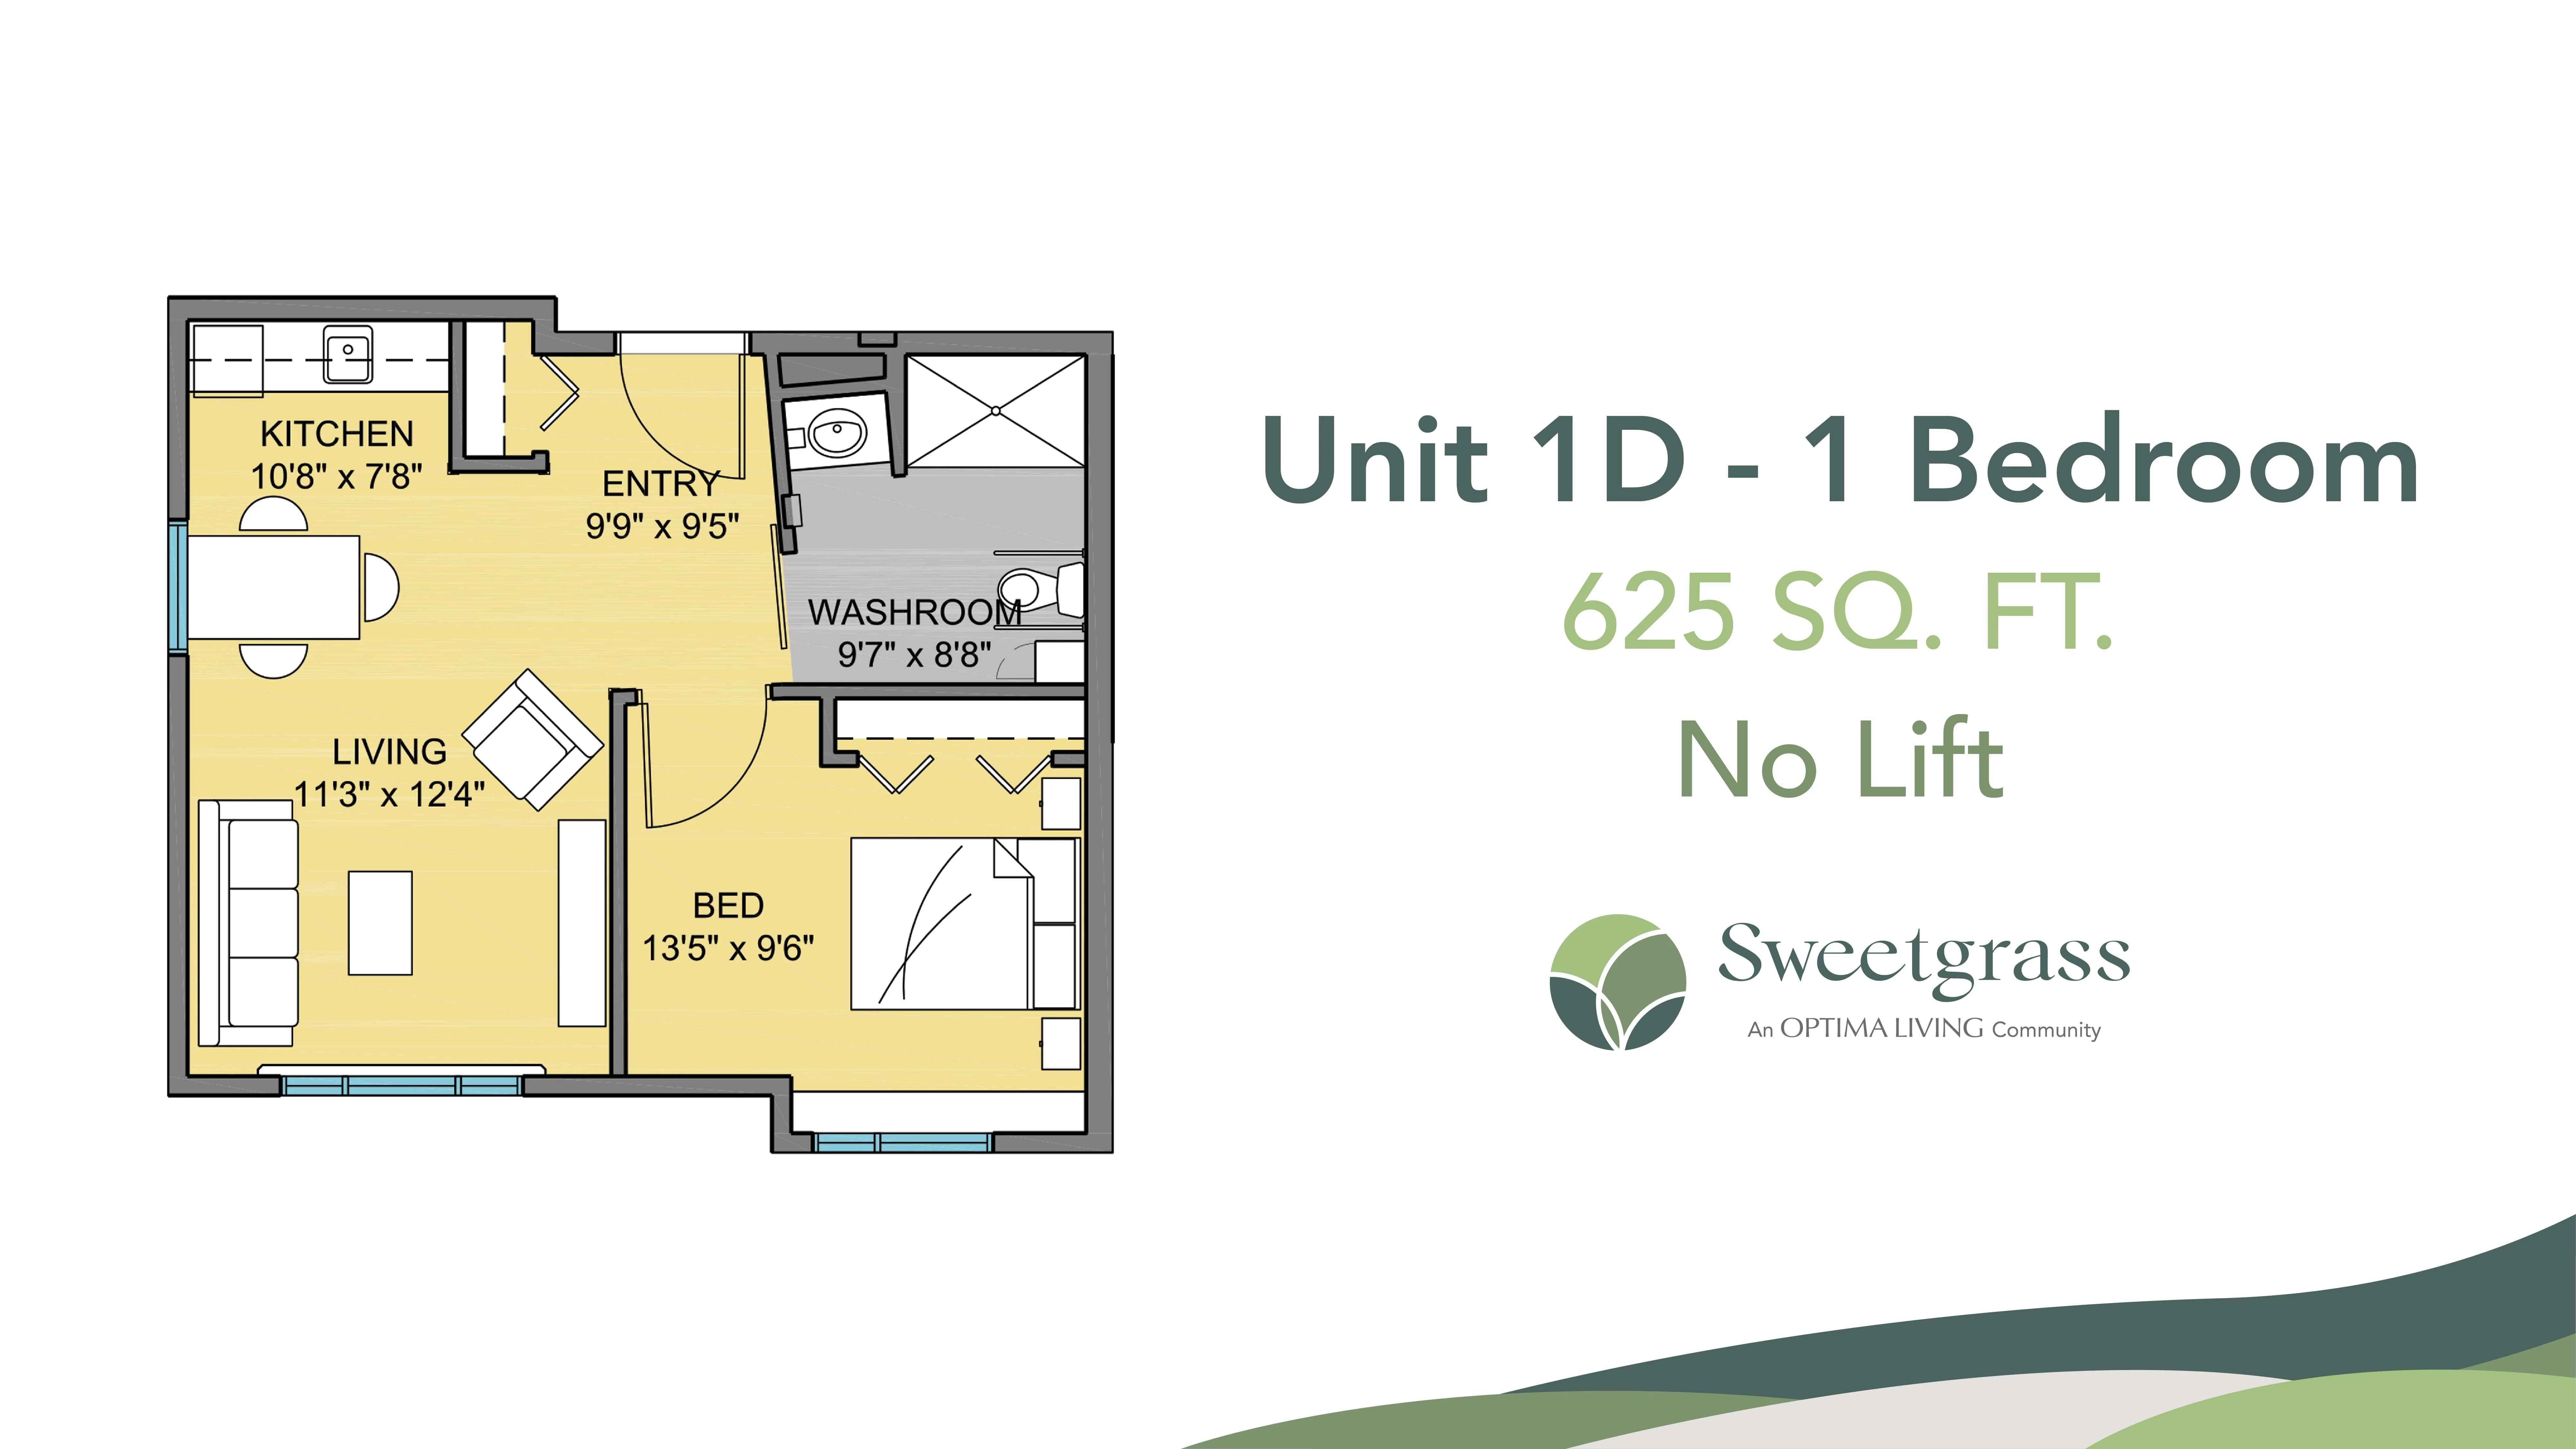 Floor plan for a Sweetgrass one bedroom suite